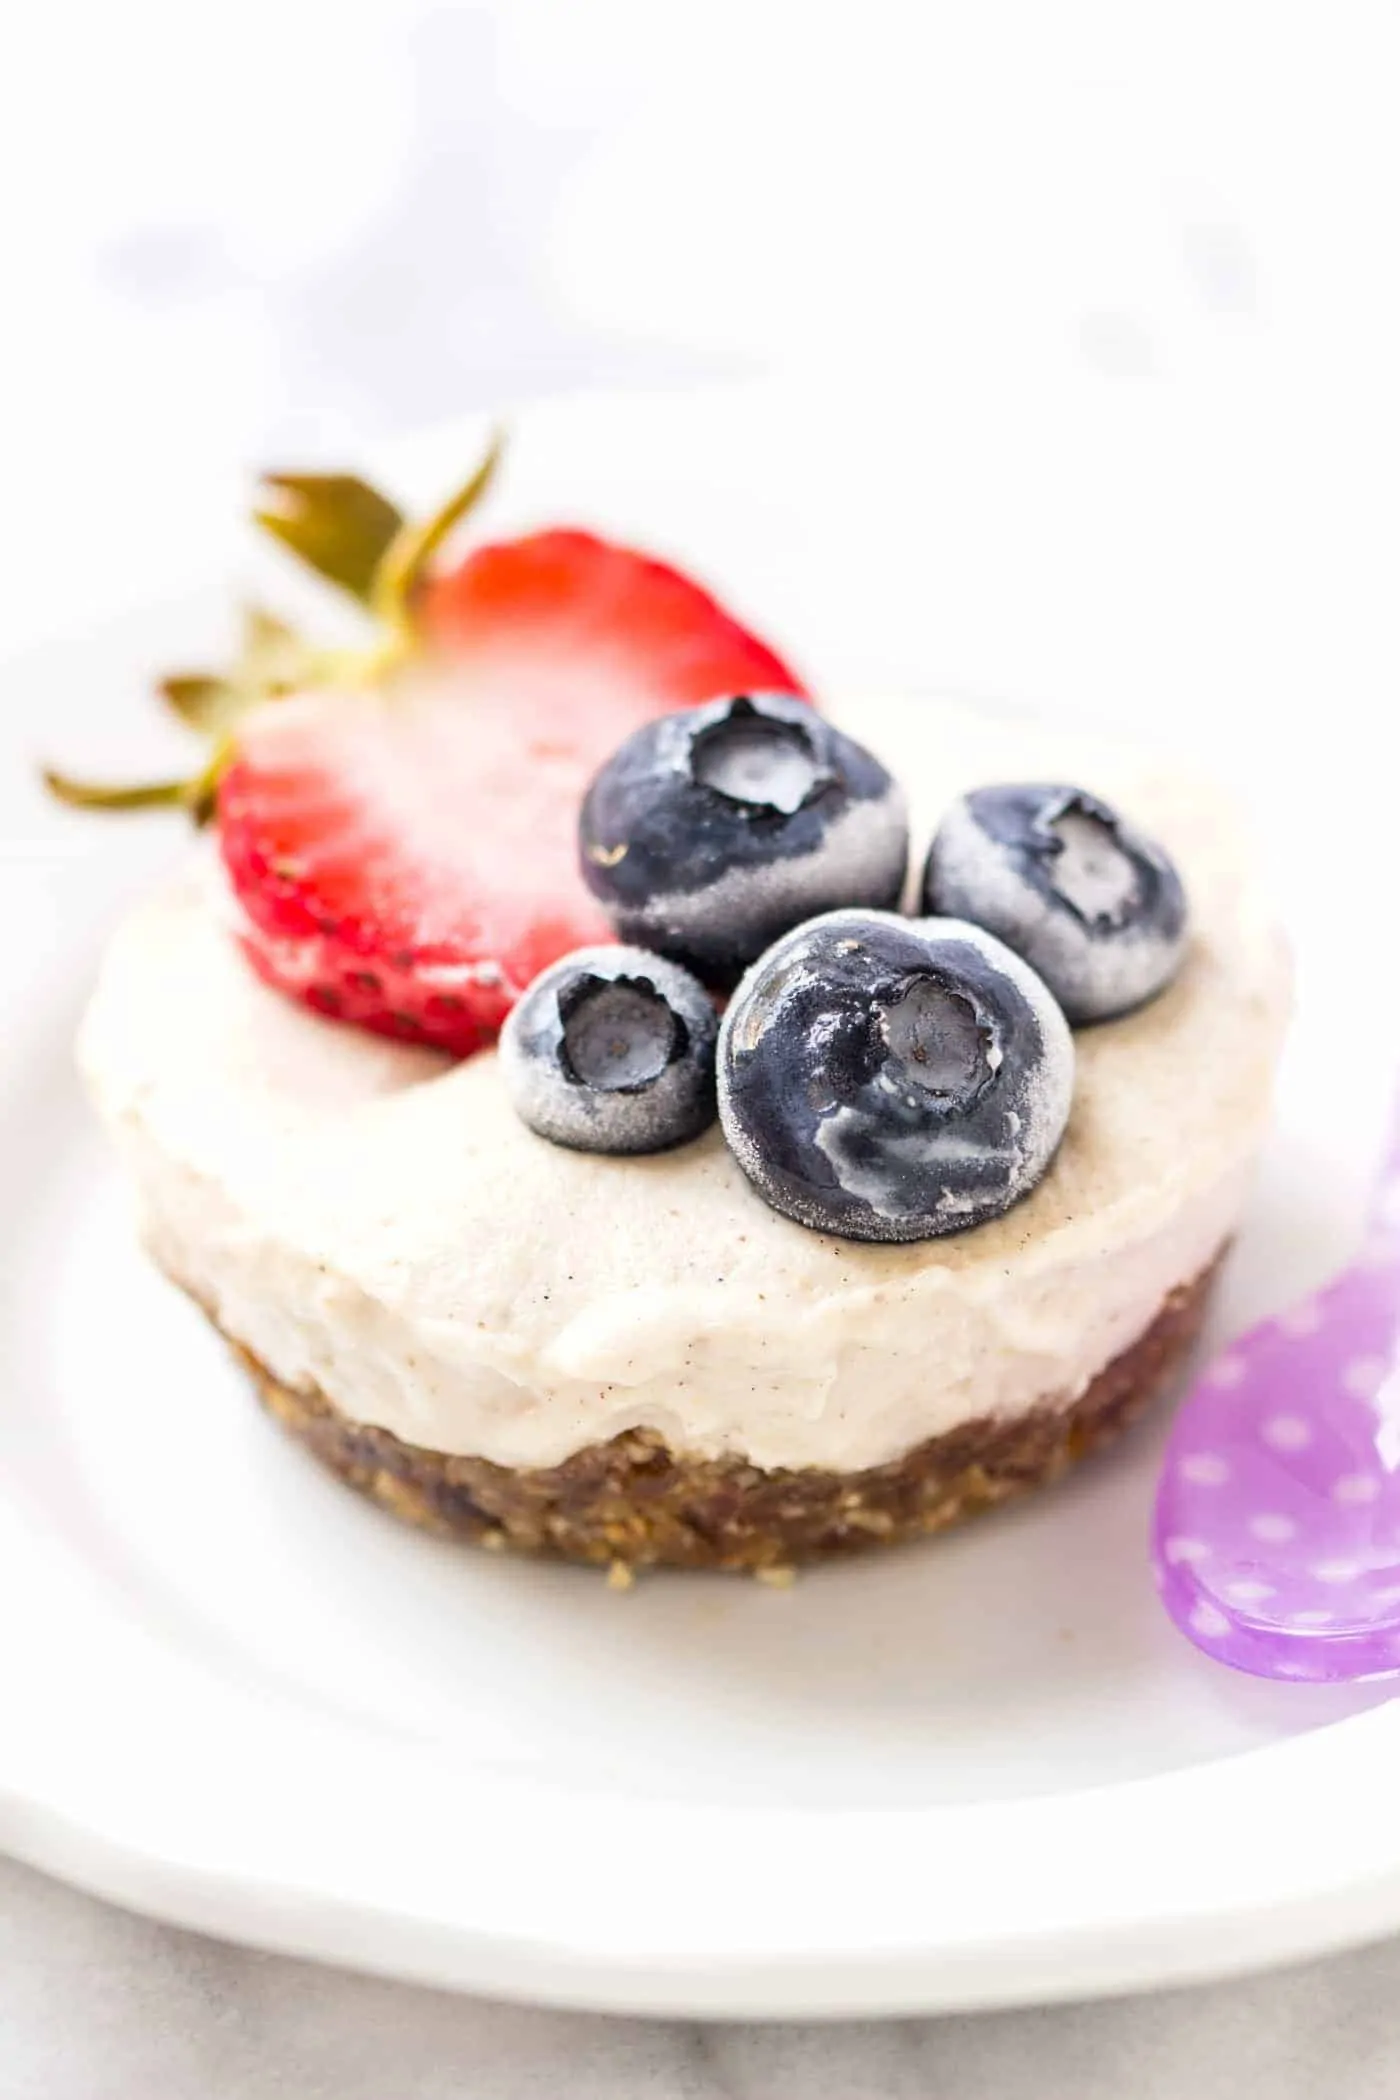 These mini vegan tarts are NO-BAKE and super healthy. Quick to make and packed with nutrients!